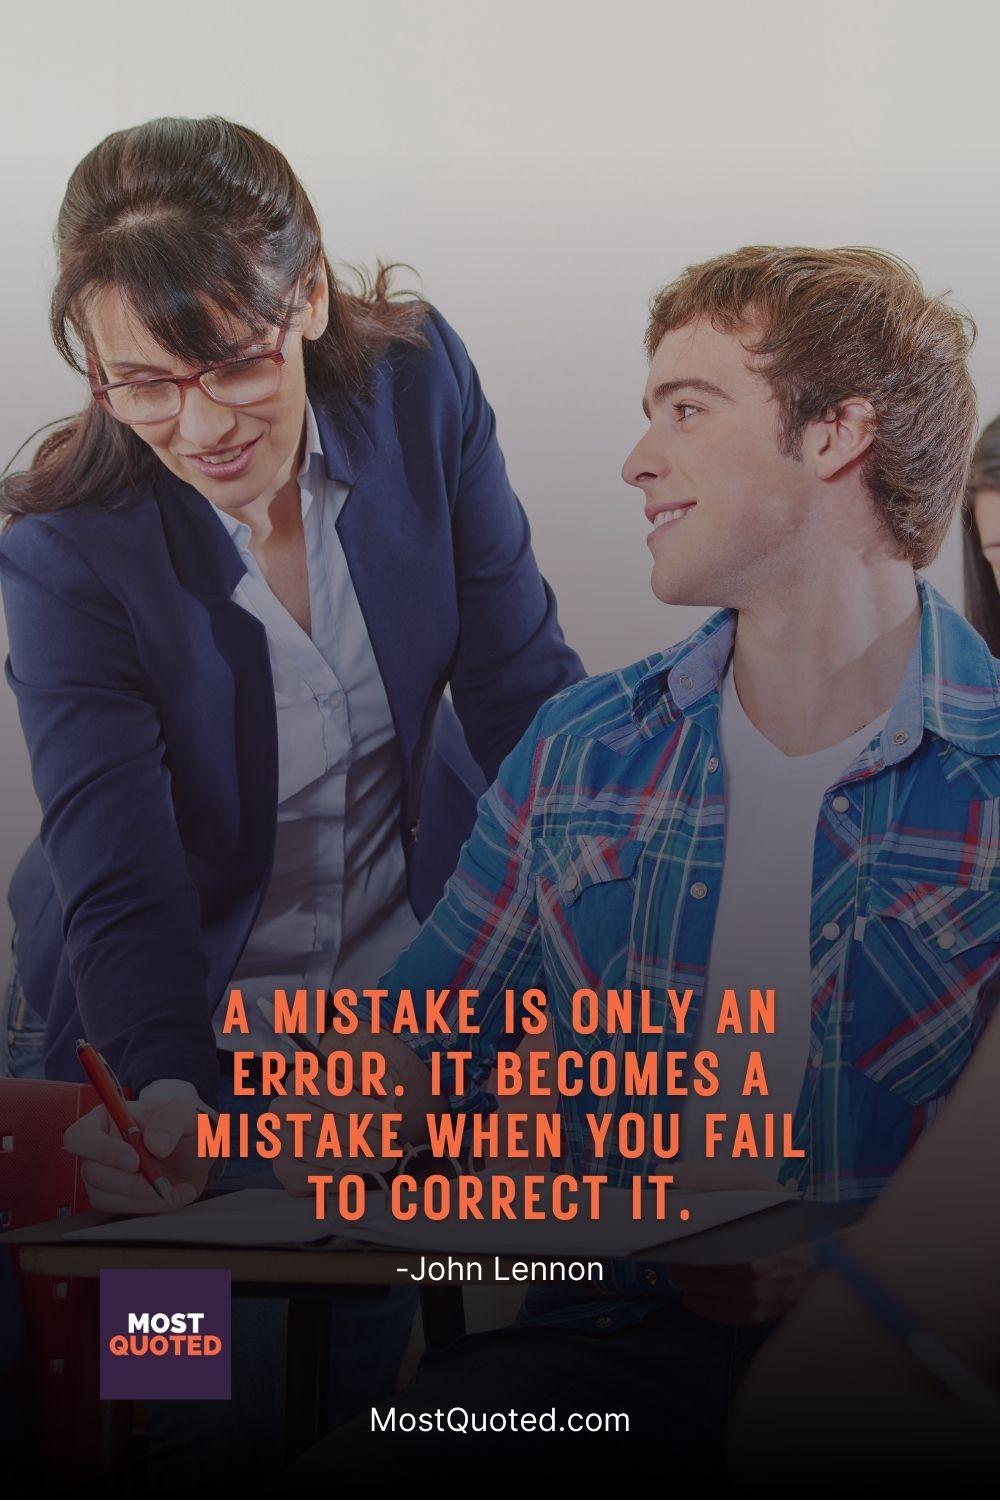 A mistake is only an error. It becomes a mistake when you fail to correct it. - John Lennon